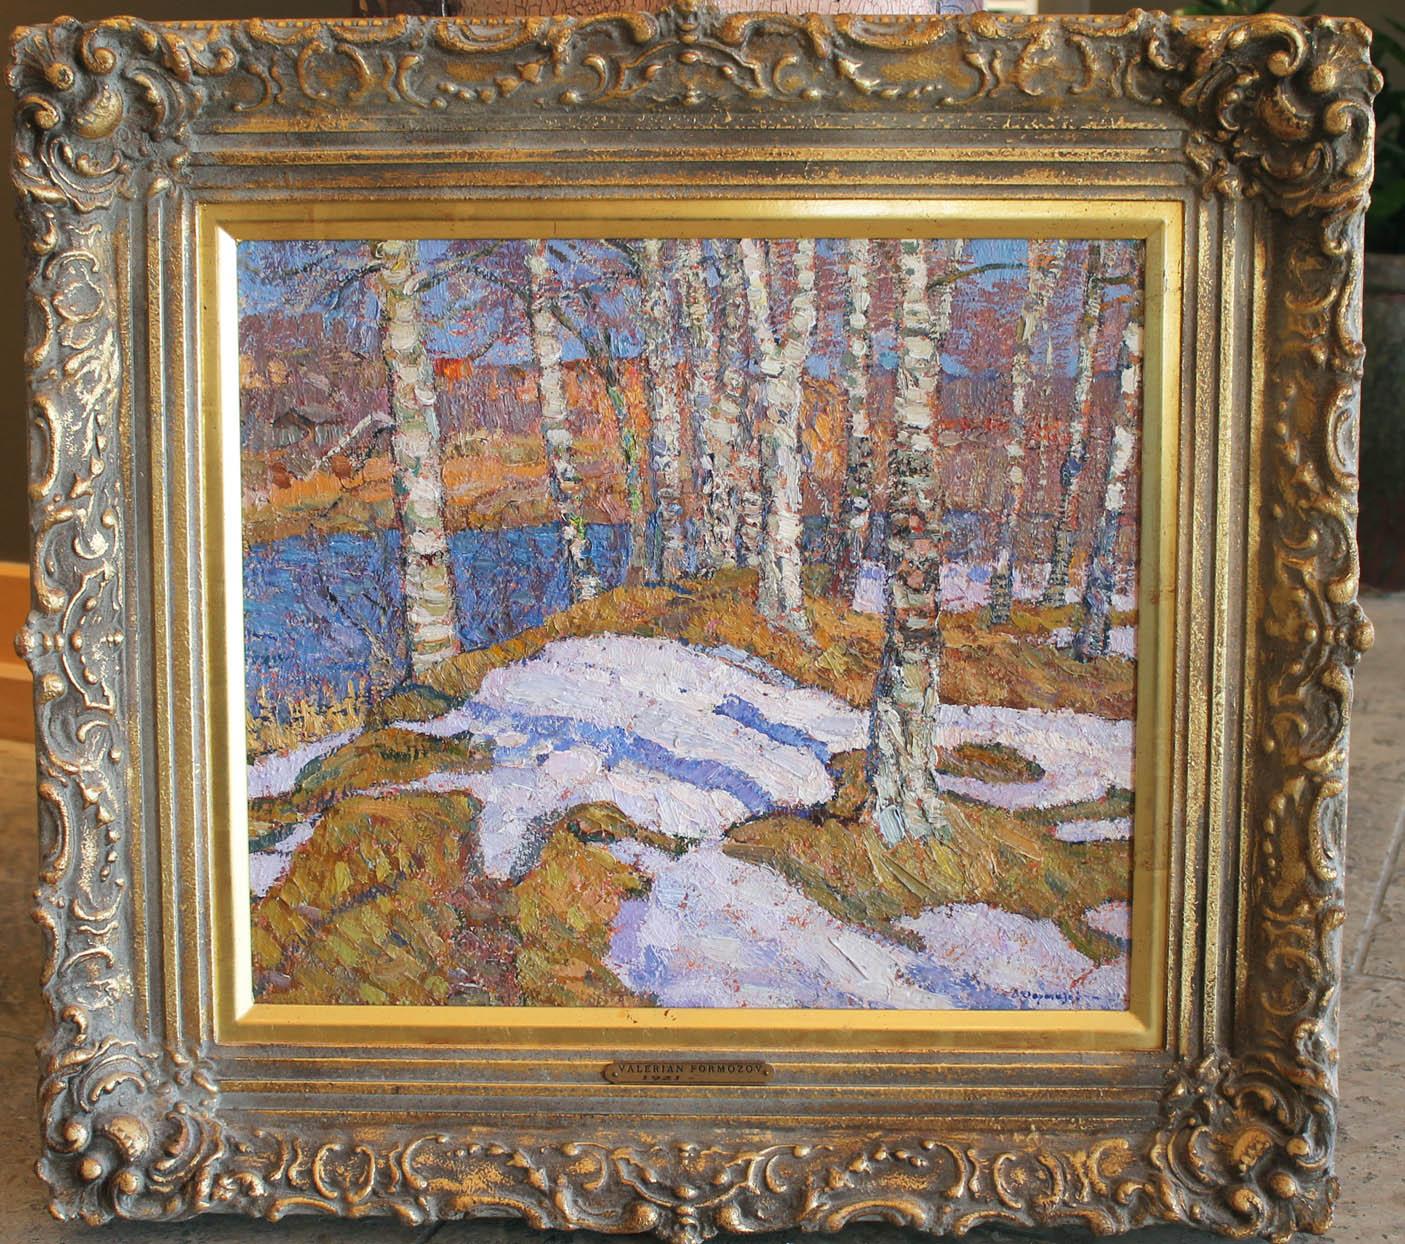 March Birch Trees - Painting by Valerian Formozov